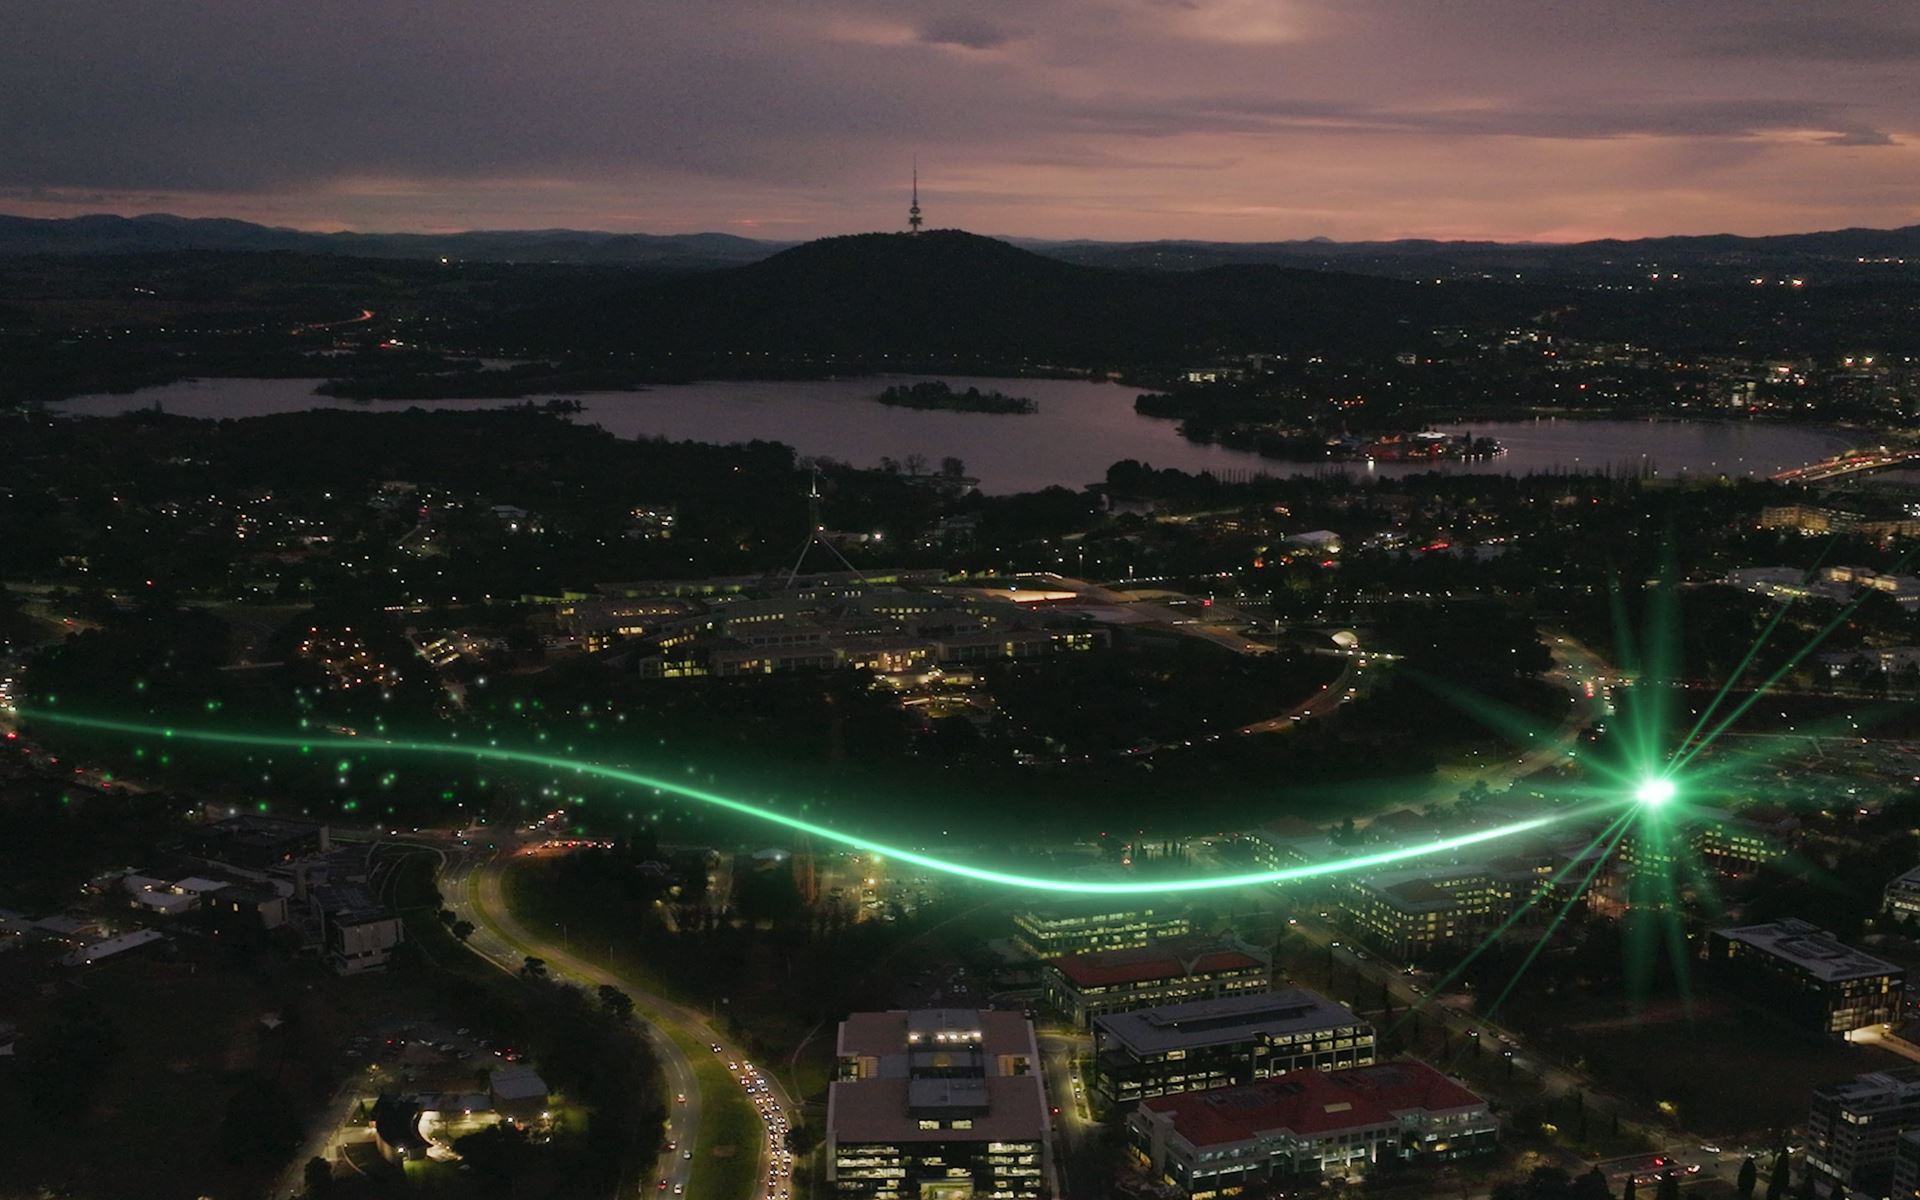 An aerial view of Canberra at night with a green light